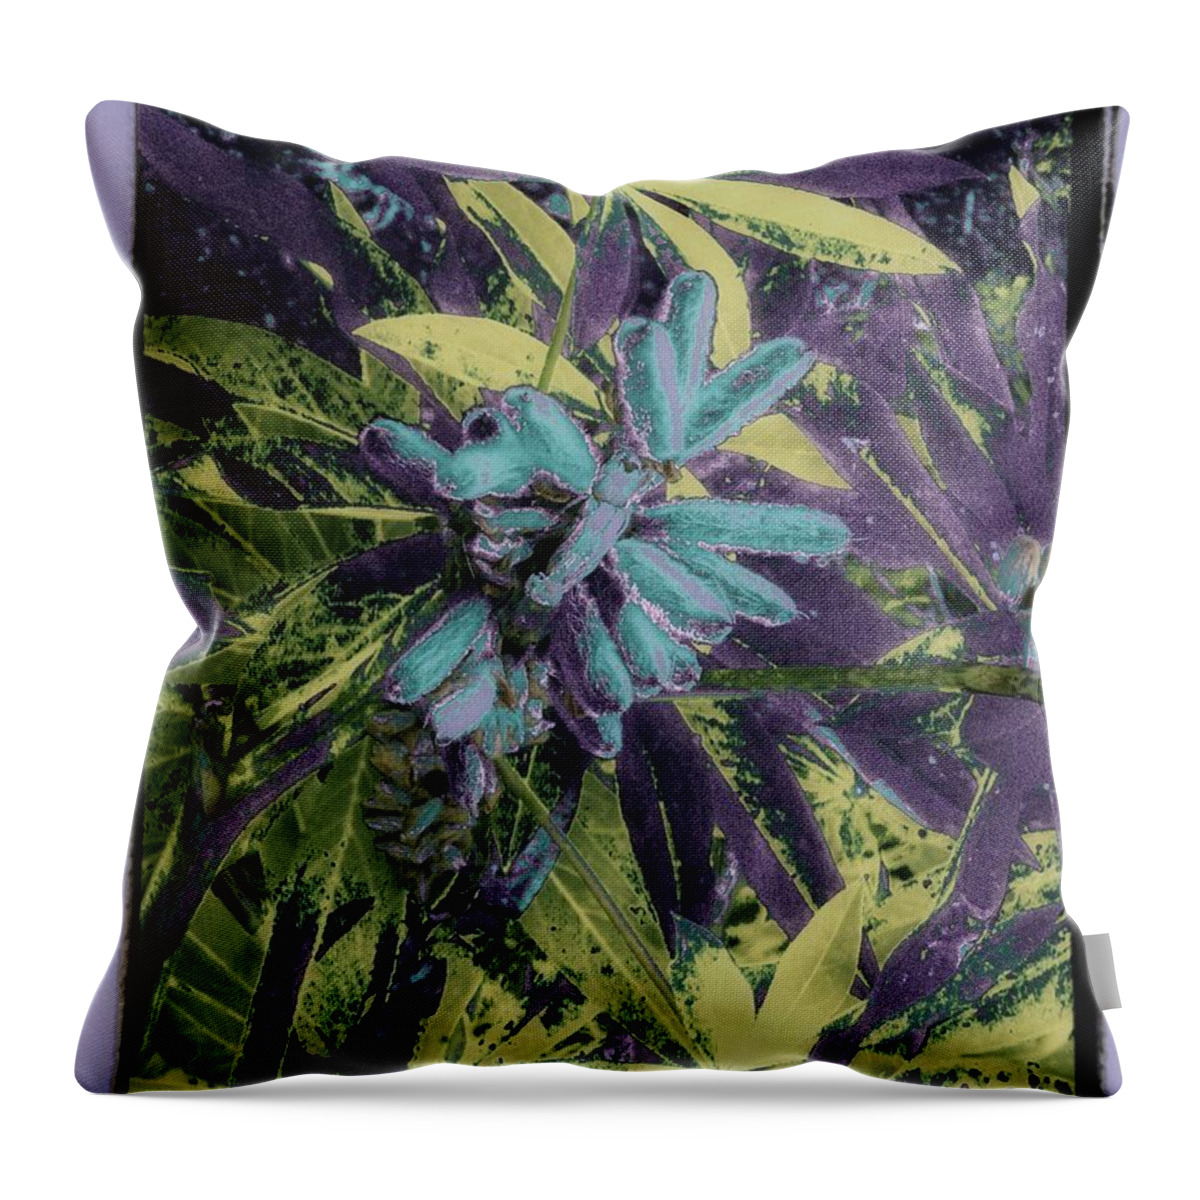 Surreal Throw Pillow featuring the photograph Enchanted Bipeds by Laureen Murtha Menzl